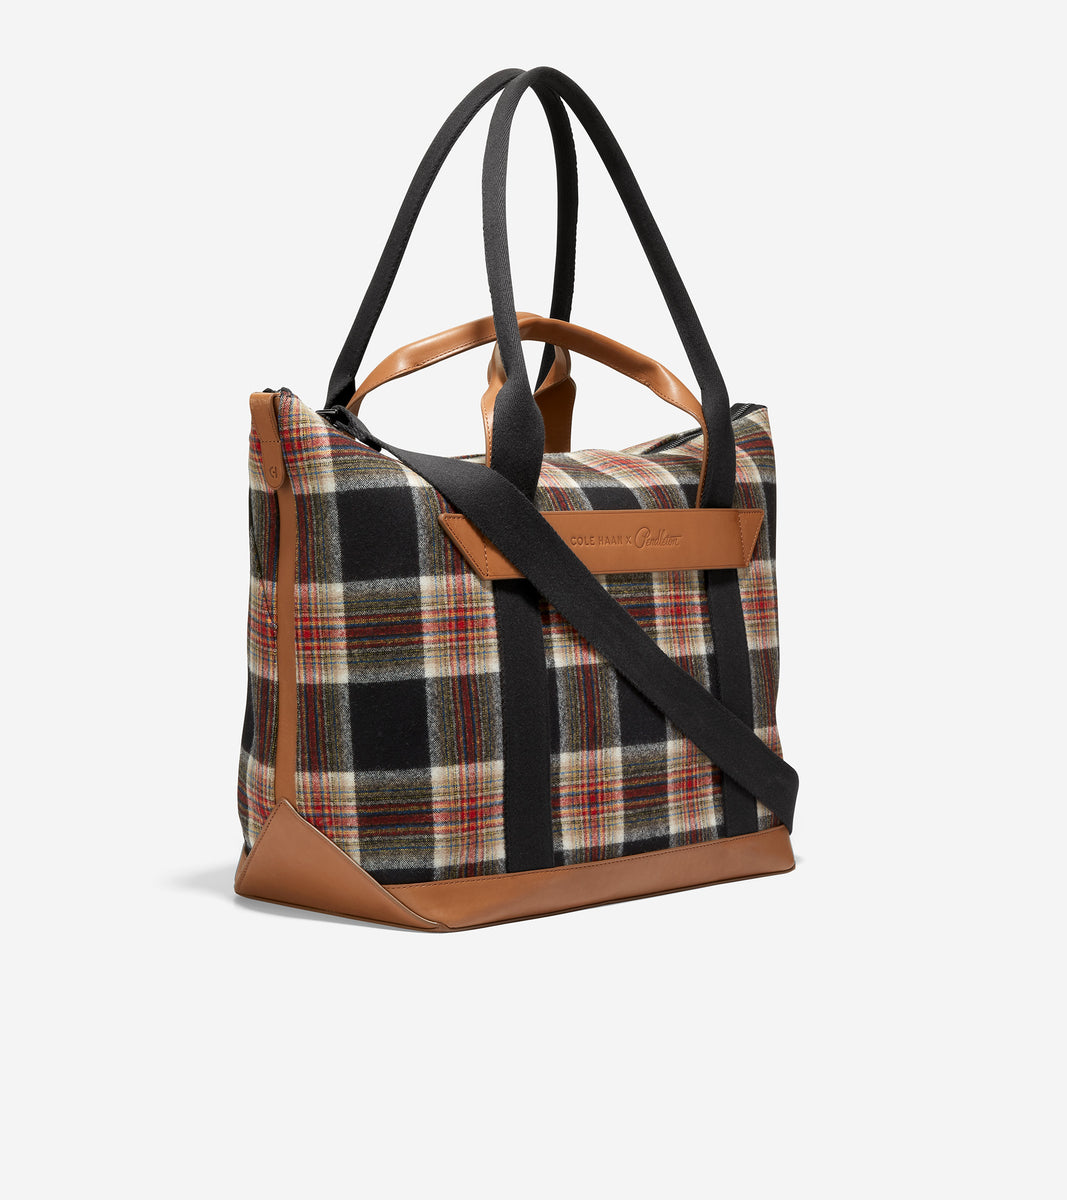 Cole Haan x Pendleton Lux Tote